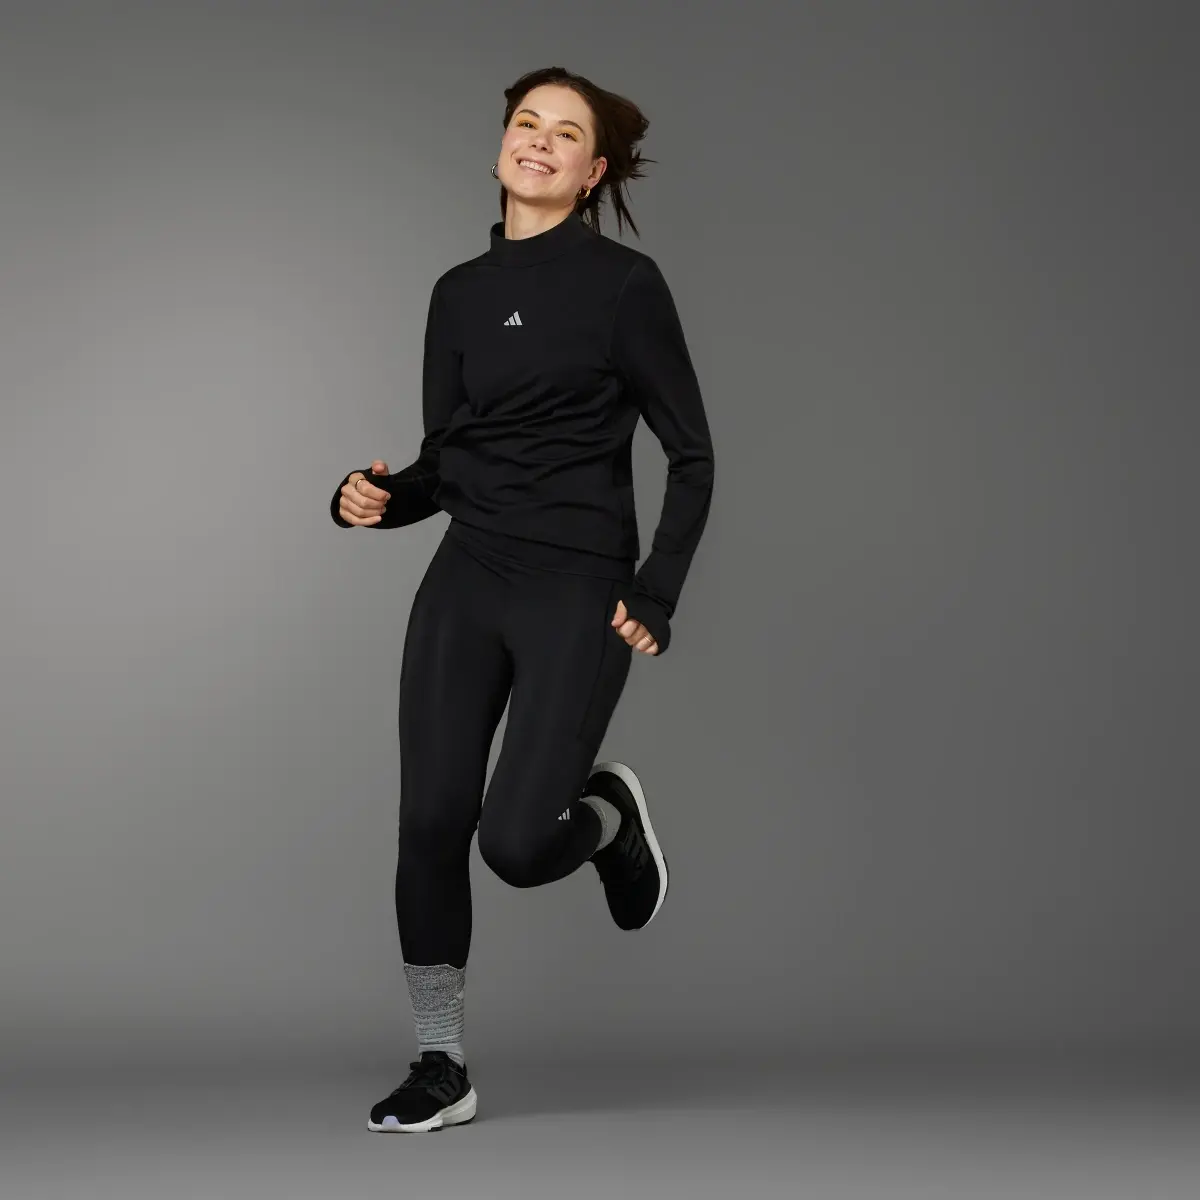 Adidas Ultimate Running Conquer the Elements Merino Long Sleeve Long-sleeve Top. 3